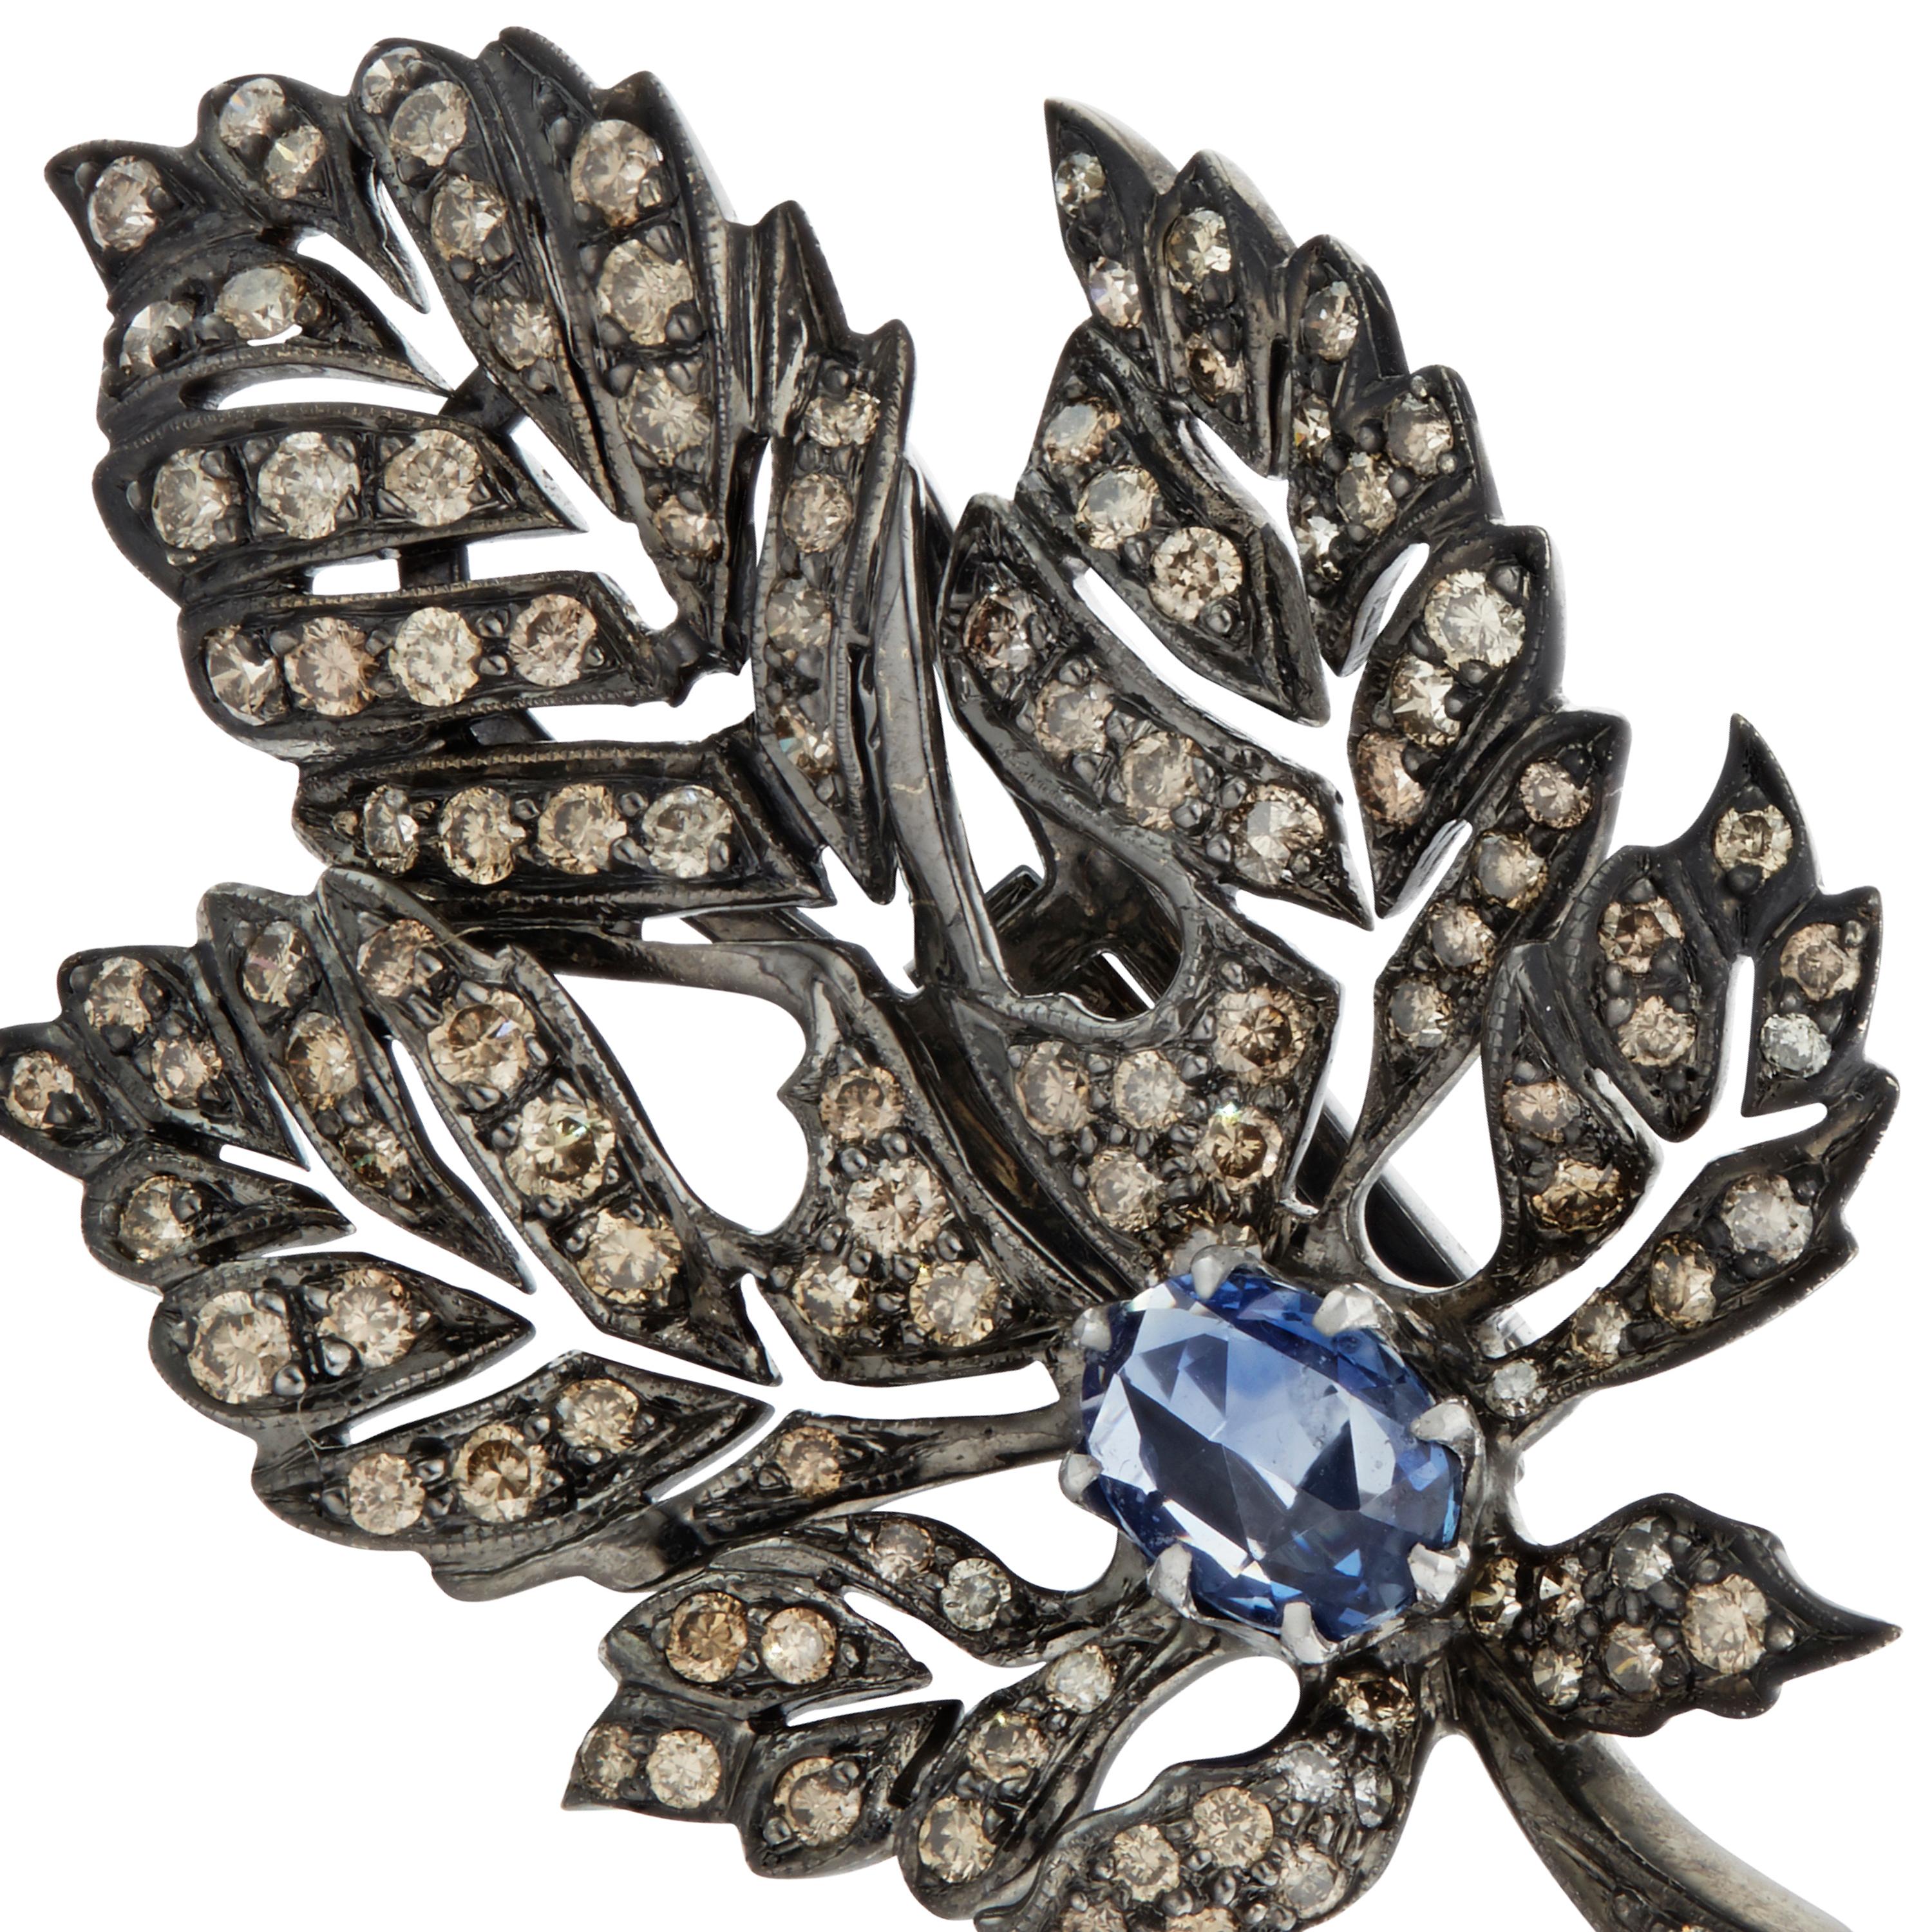 Gold: 22.60 grams
Blue Sapphire: 1.57 carats 
Diamond: 3.13 carats 

Inspired by antique Victorian designs from the natural world, Manpriya B's leaf earrings are perfectly sculpted to frame your face with their softly glittering leaves.  Brown